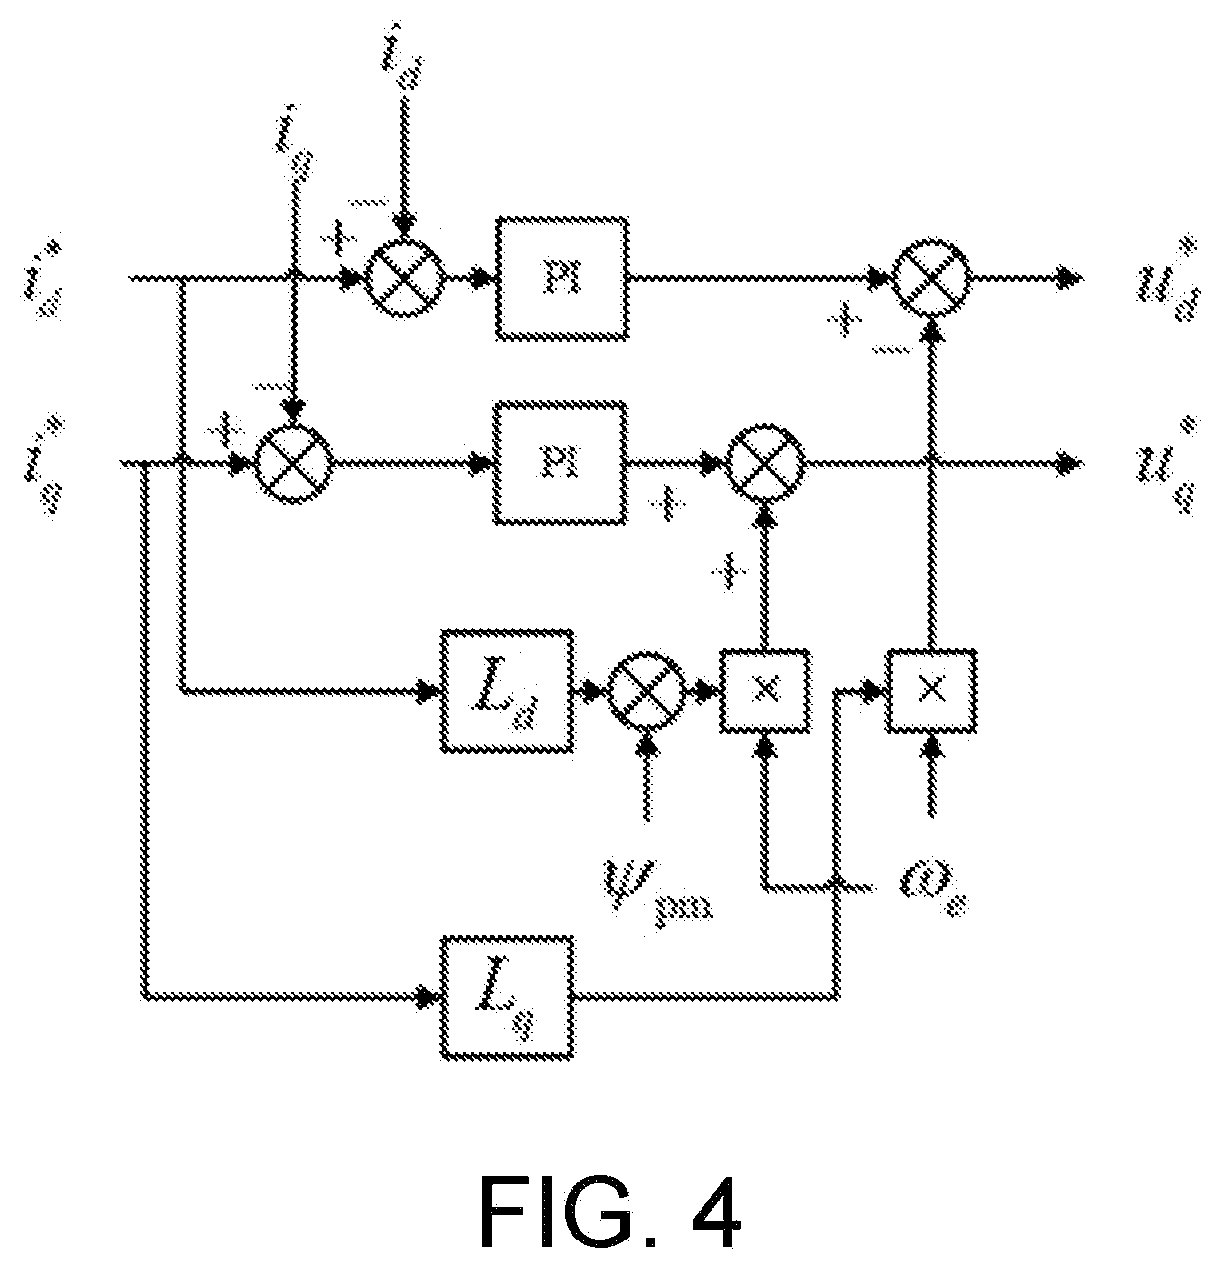 Memory motor winding multiplexing control method and system for flux linkage observation